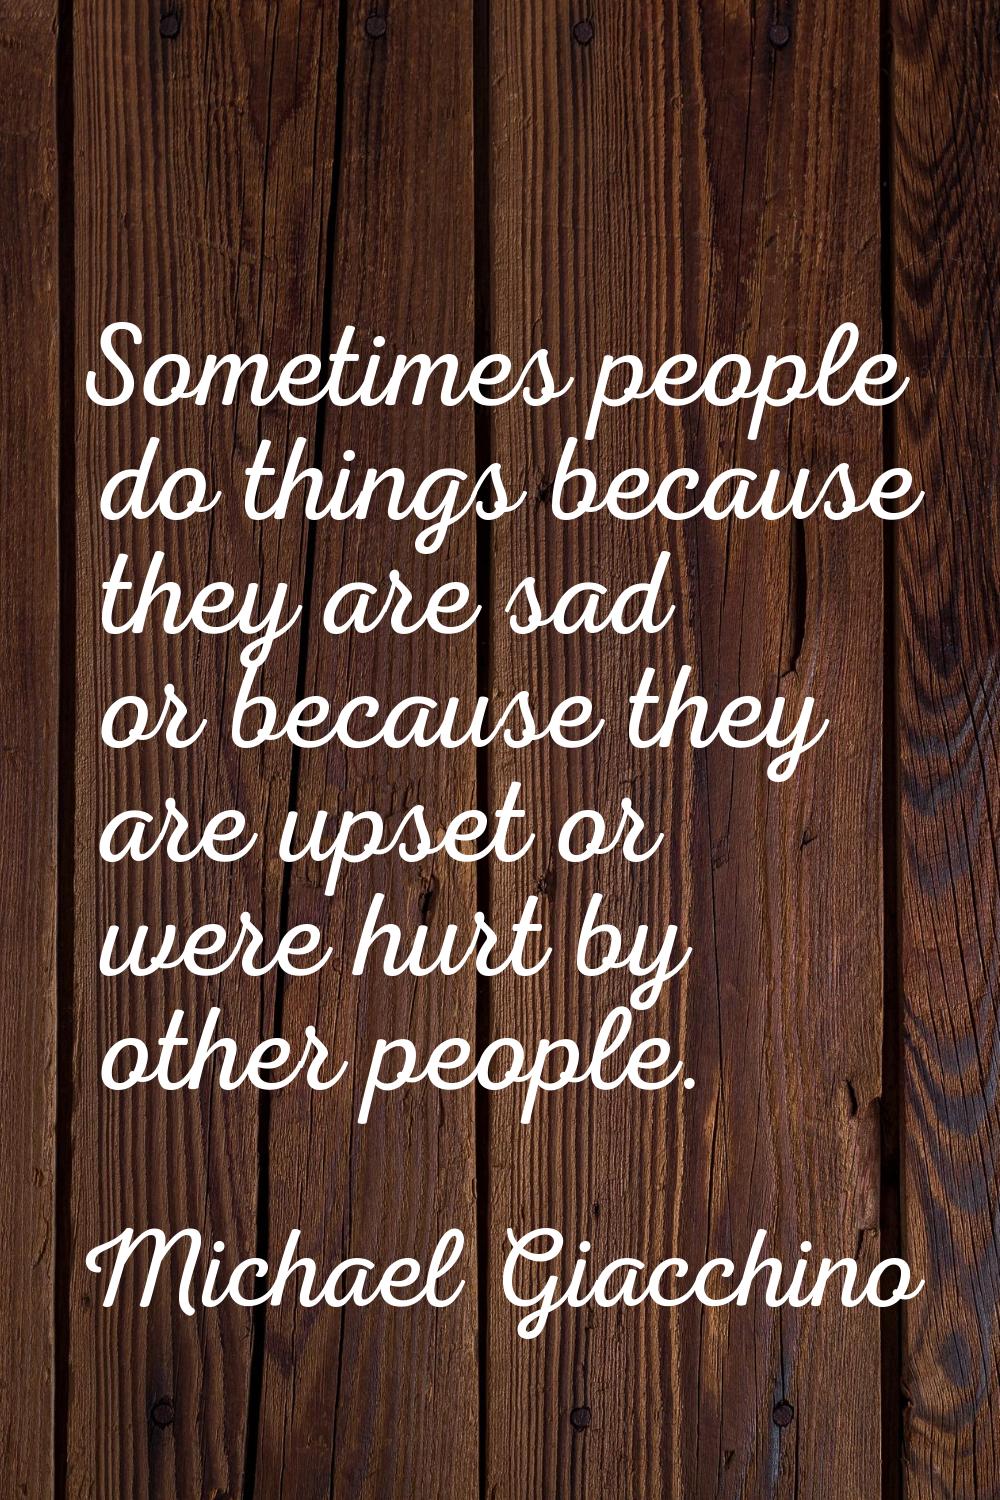 Sometimes people do things because they are sad or because they are upset or were hurt by other peo